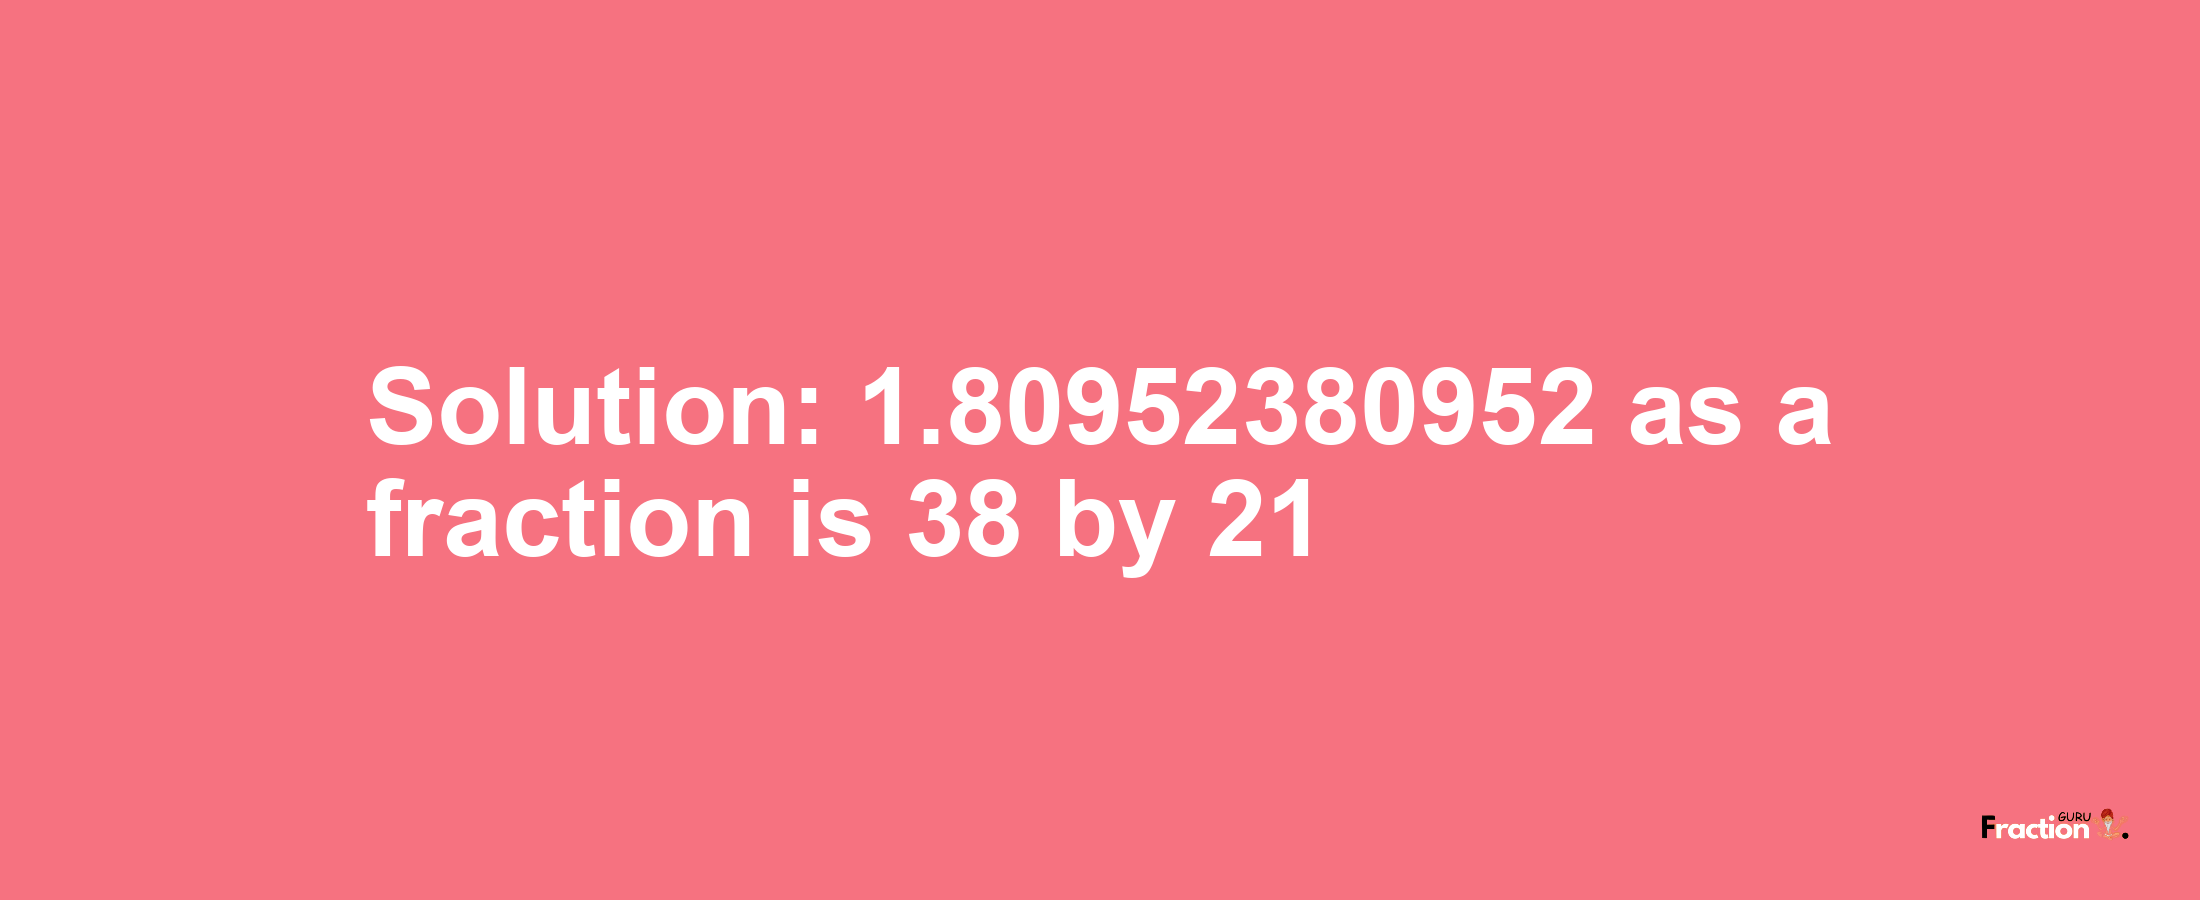 Solution:1.80952380952 as a fraction is 38/21